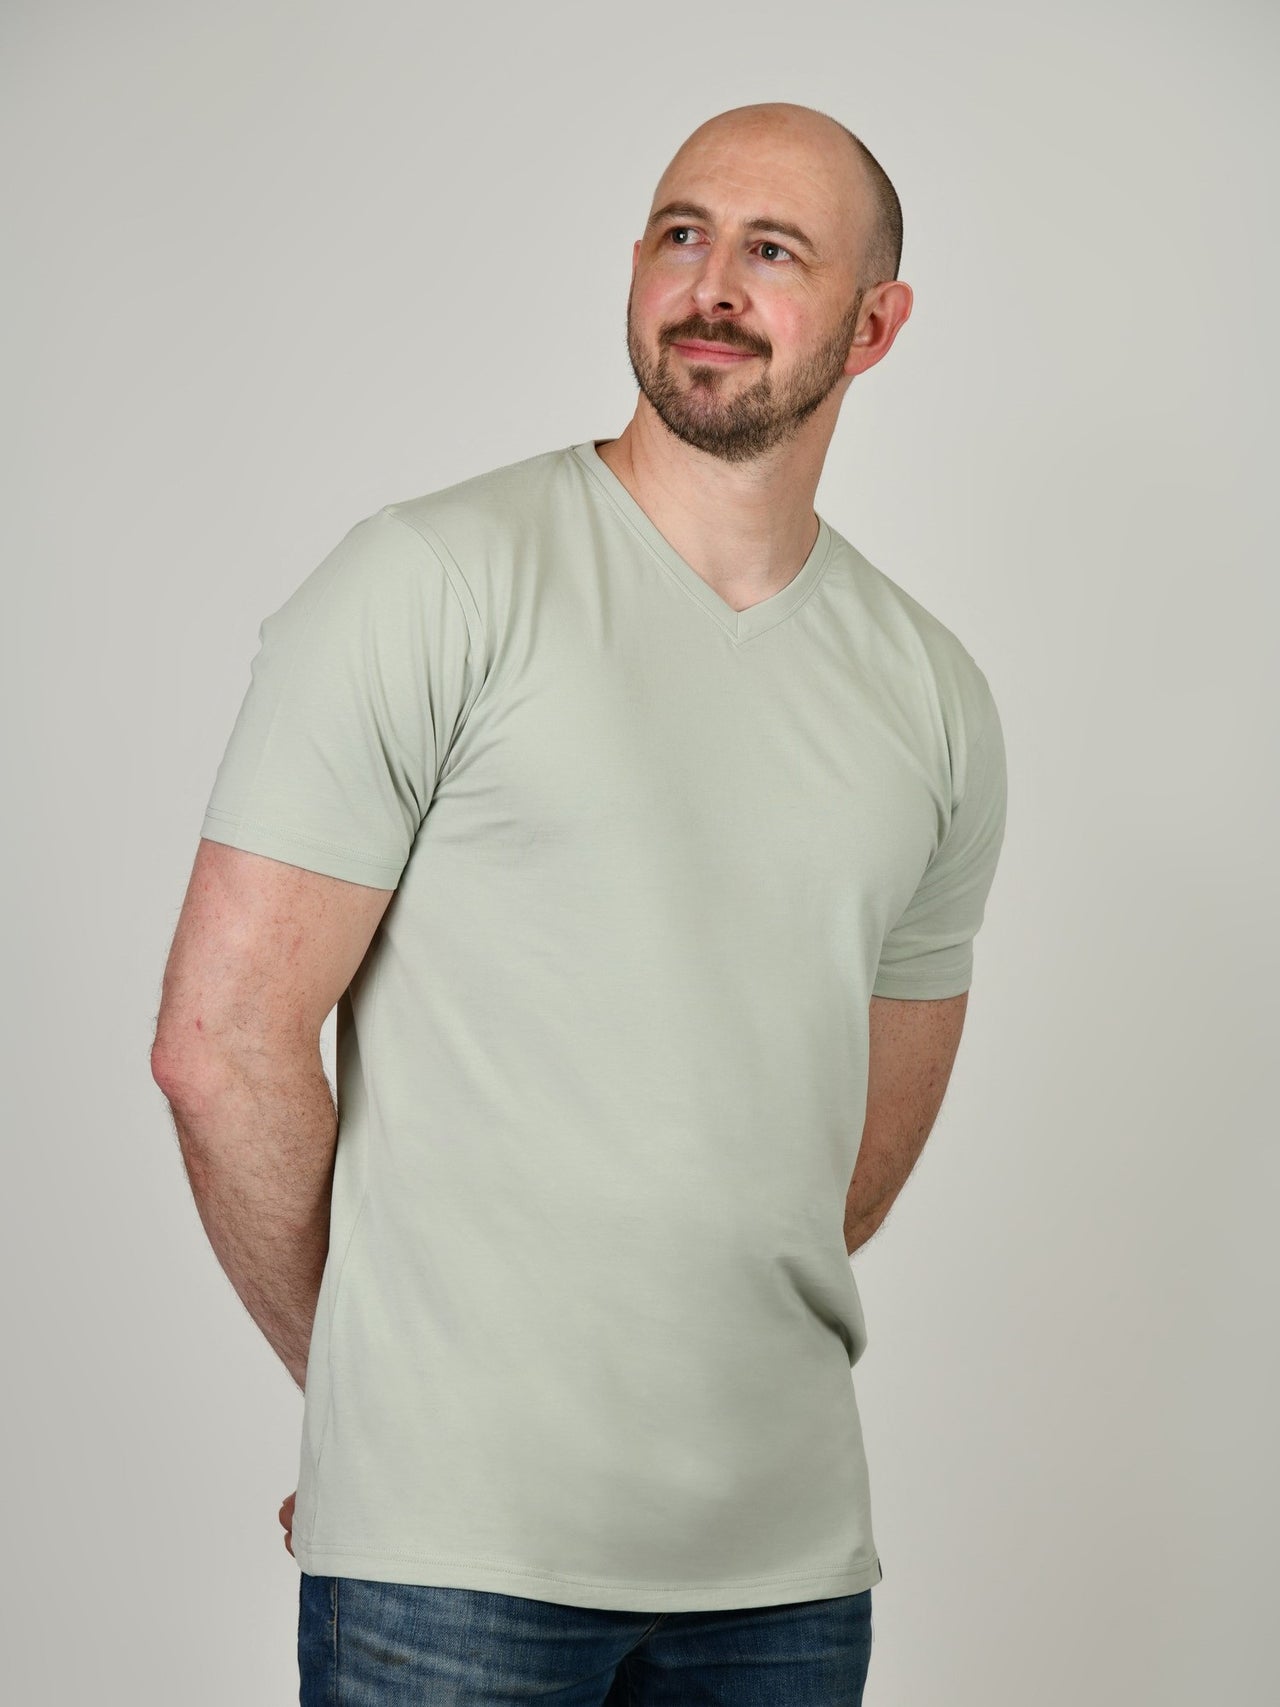 A tall and slim guy in the studio, hands behind back and wearing a sage green XL tall slim v-neck t-shirt.